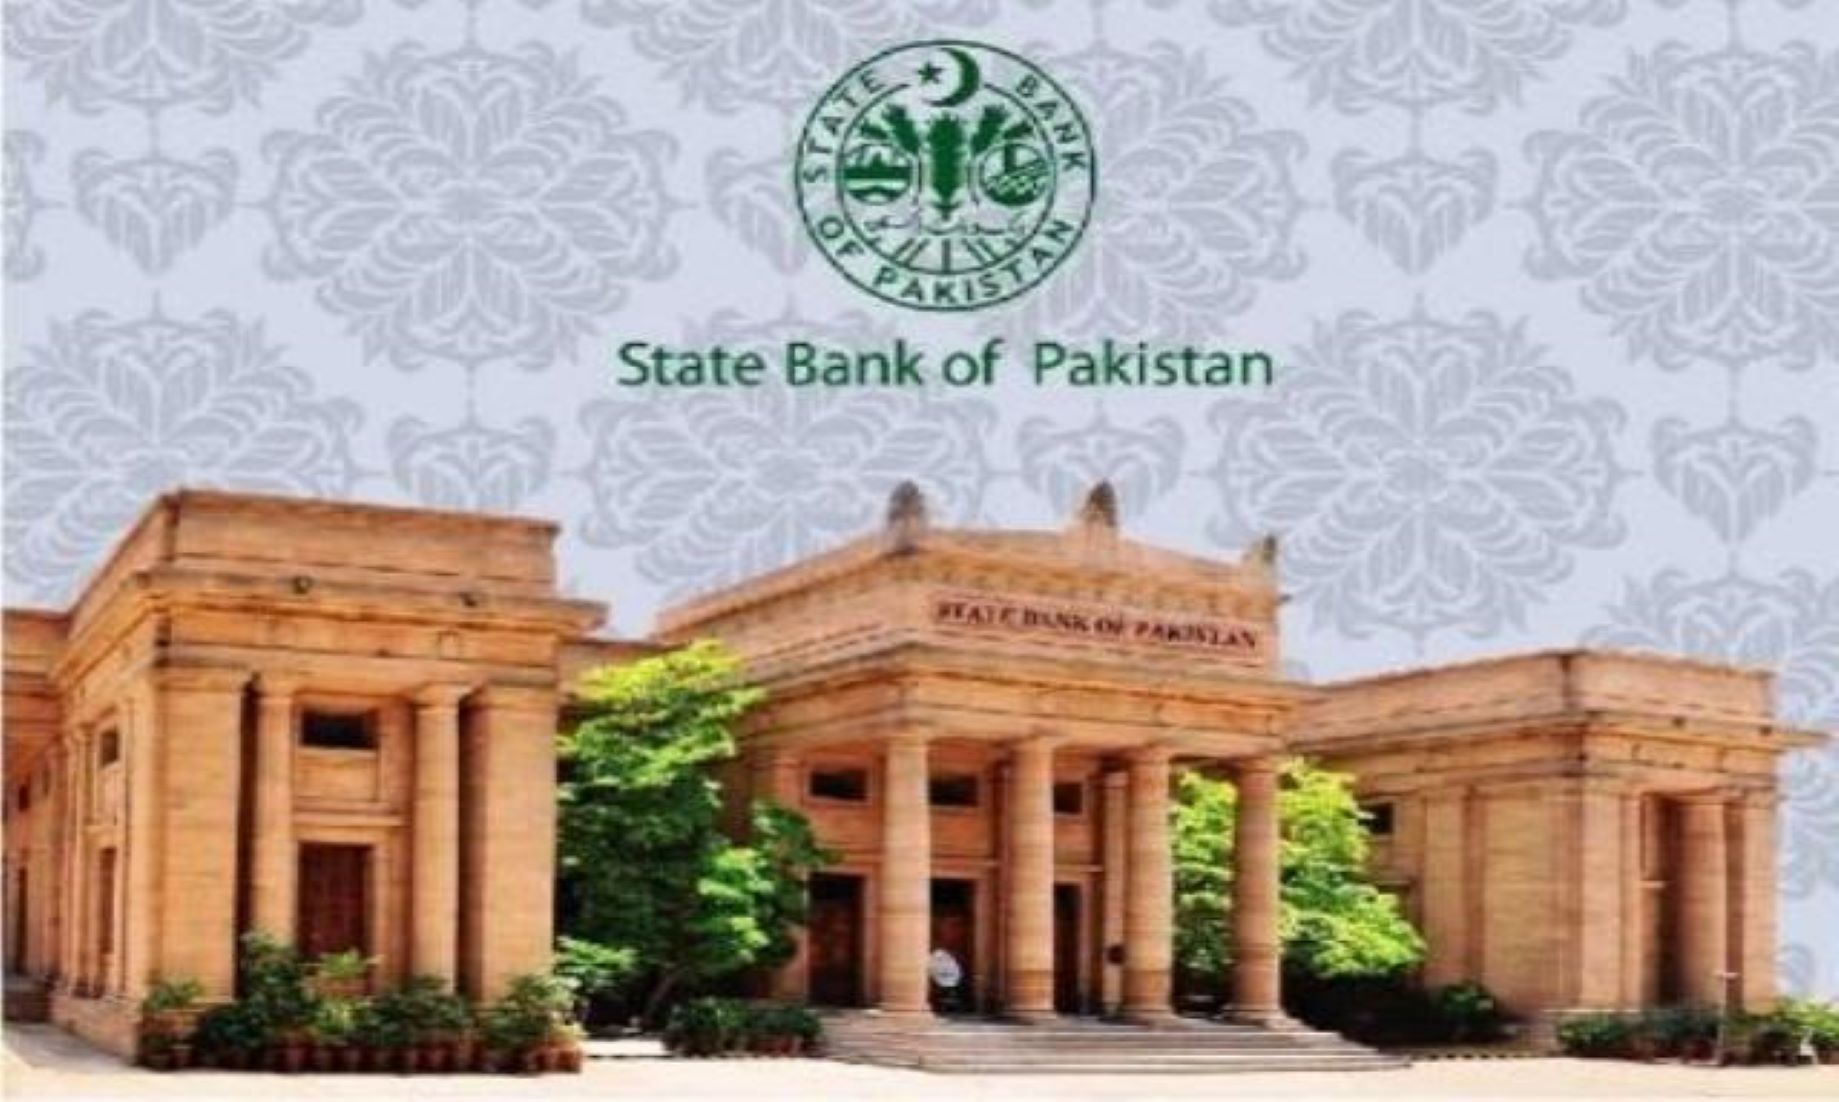 Pakistan Increased Policy Rate By 100 Basis Points To 16 Percent, Amid Inflationary Pressures